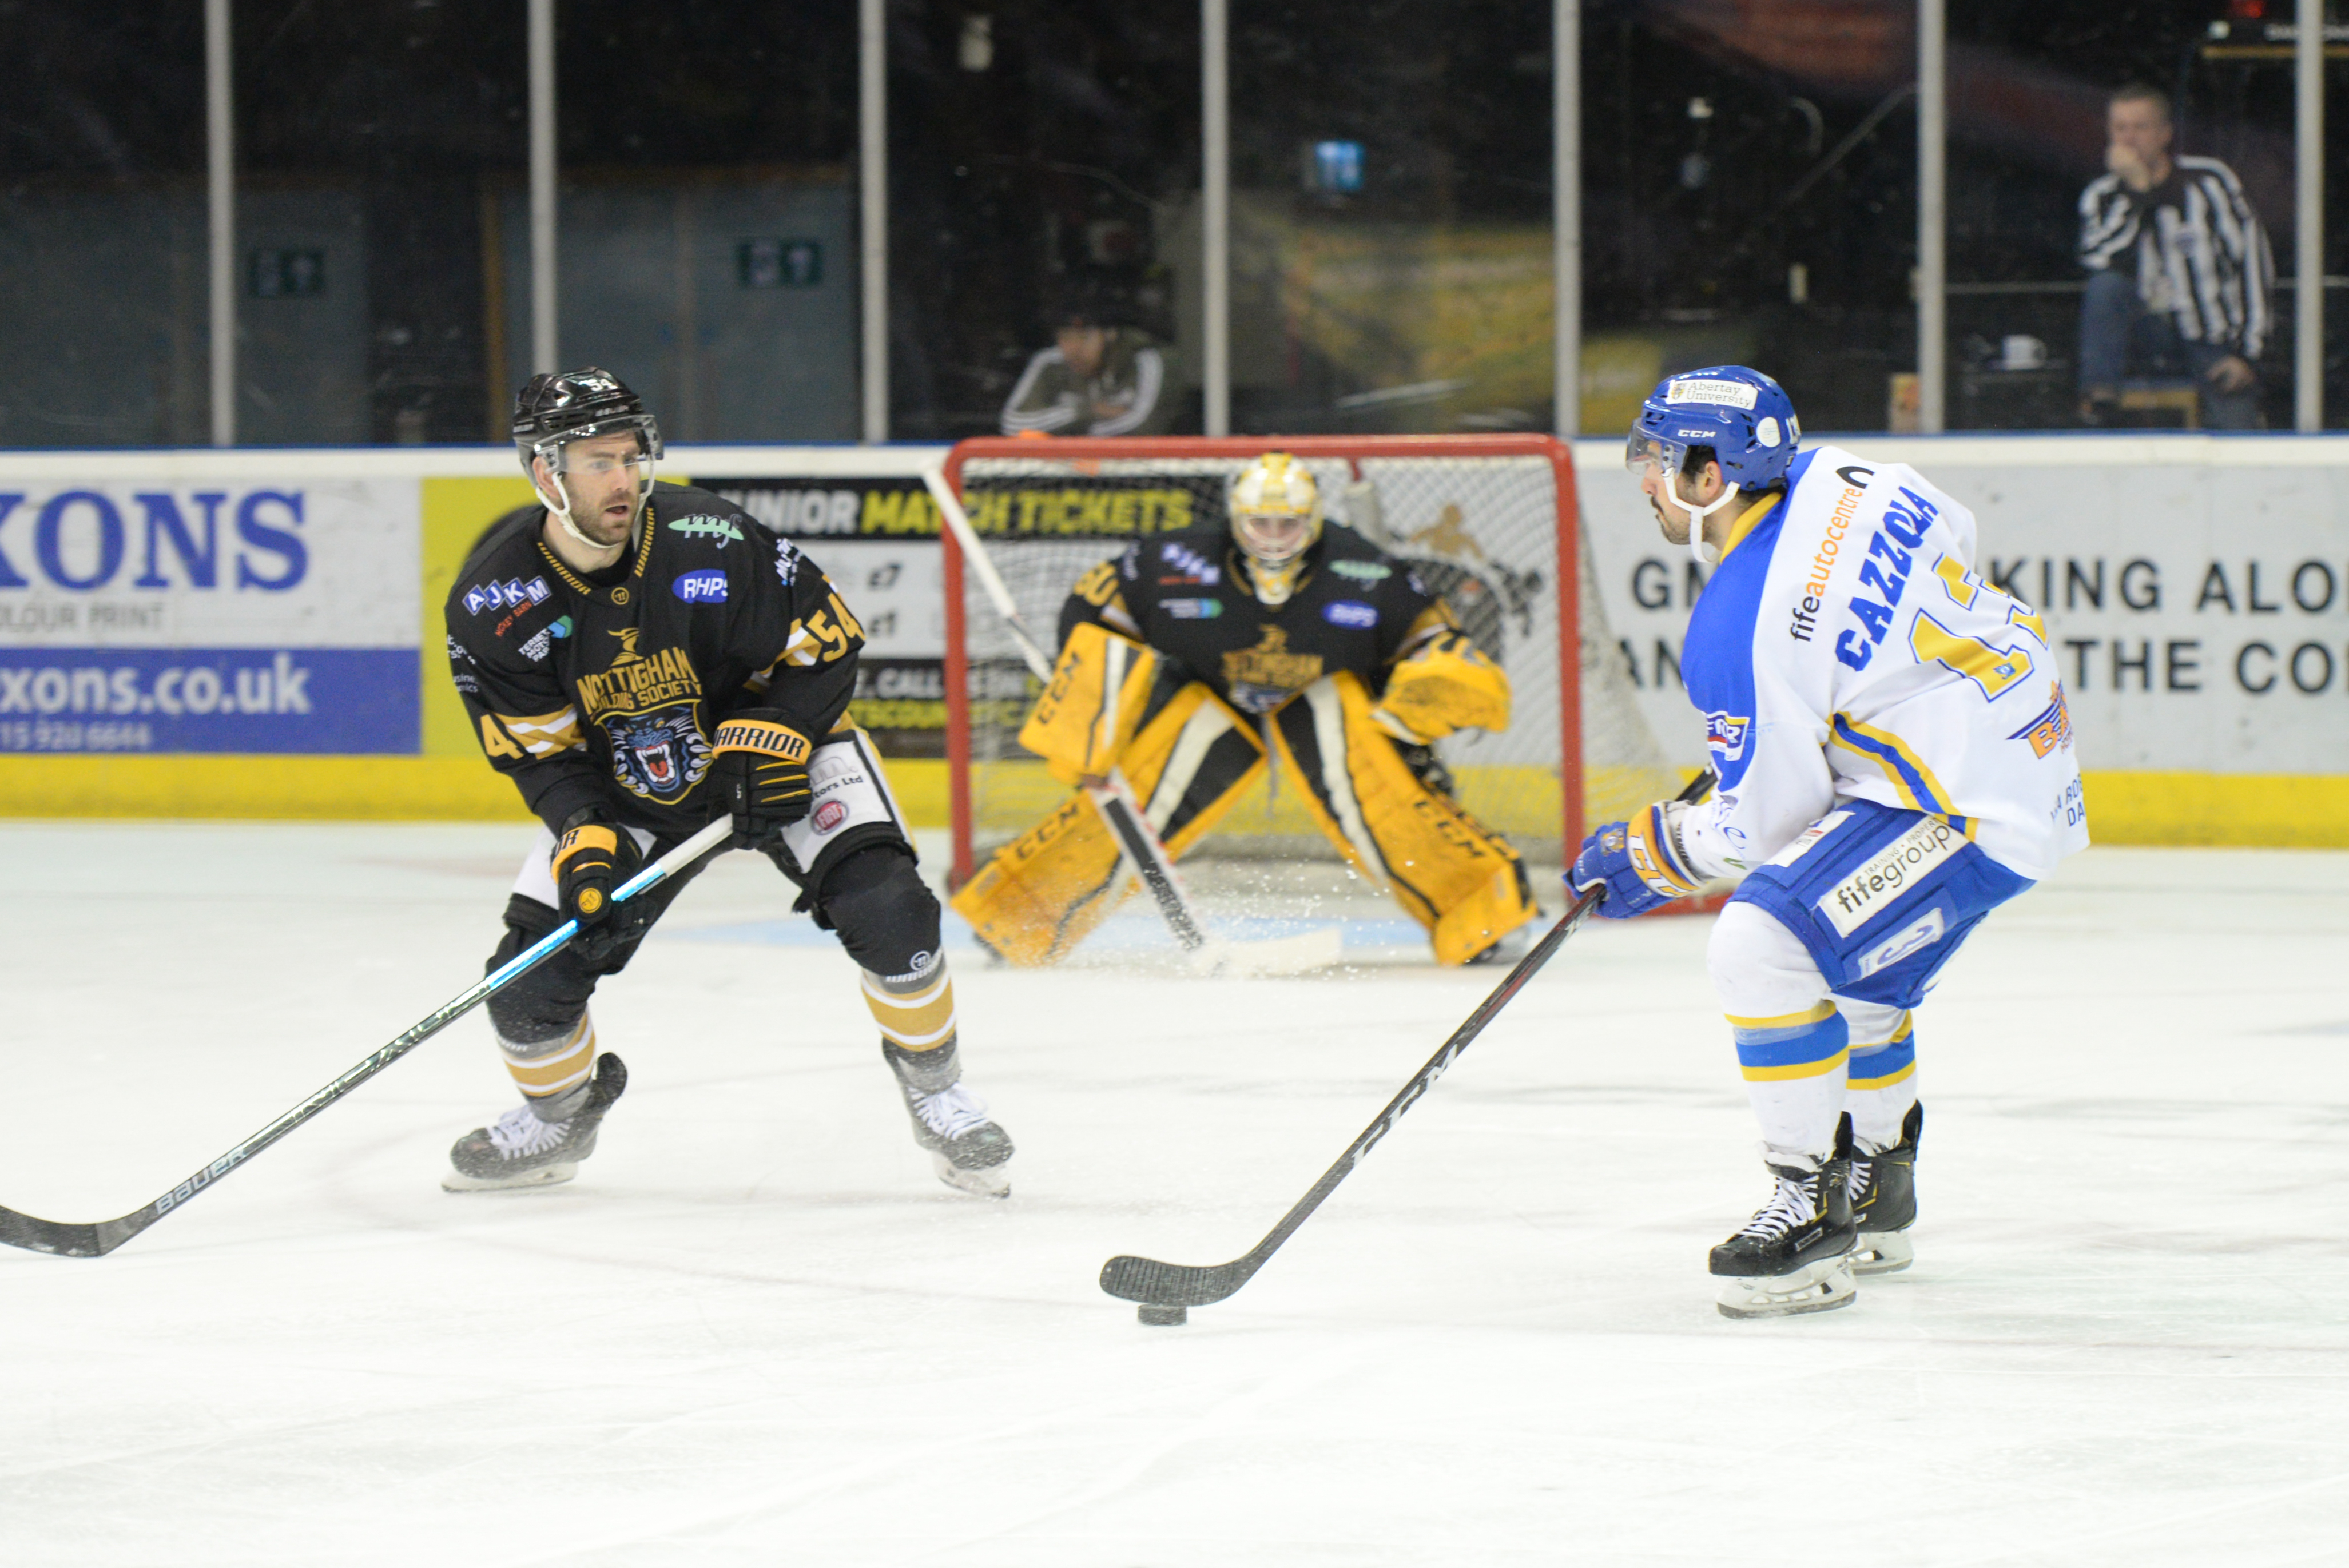 Highlights: Panthers vs Flyers | 03/03/19 Top Image